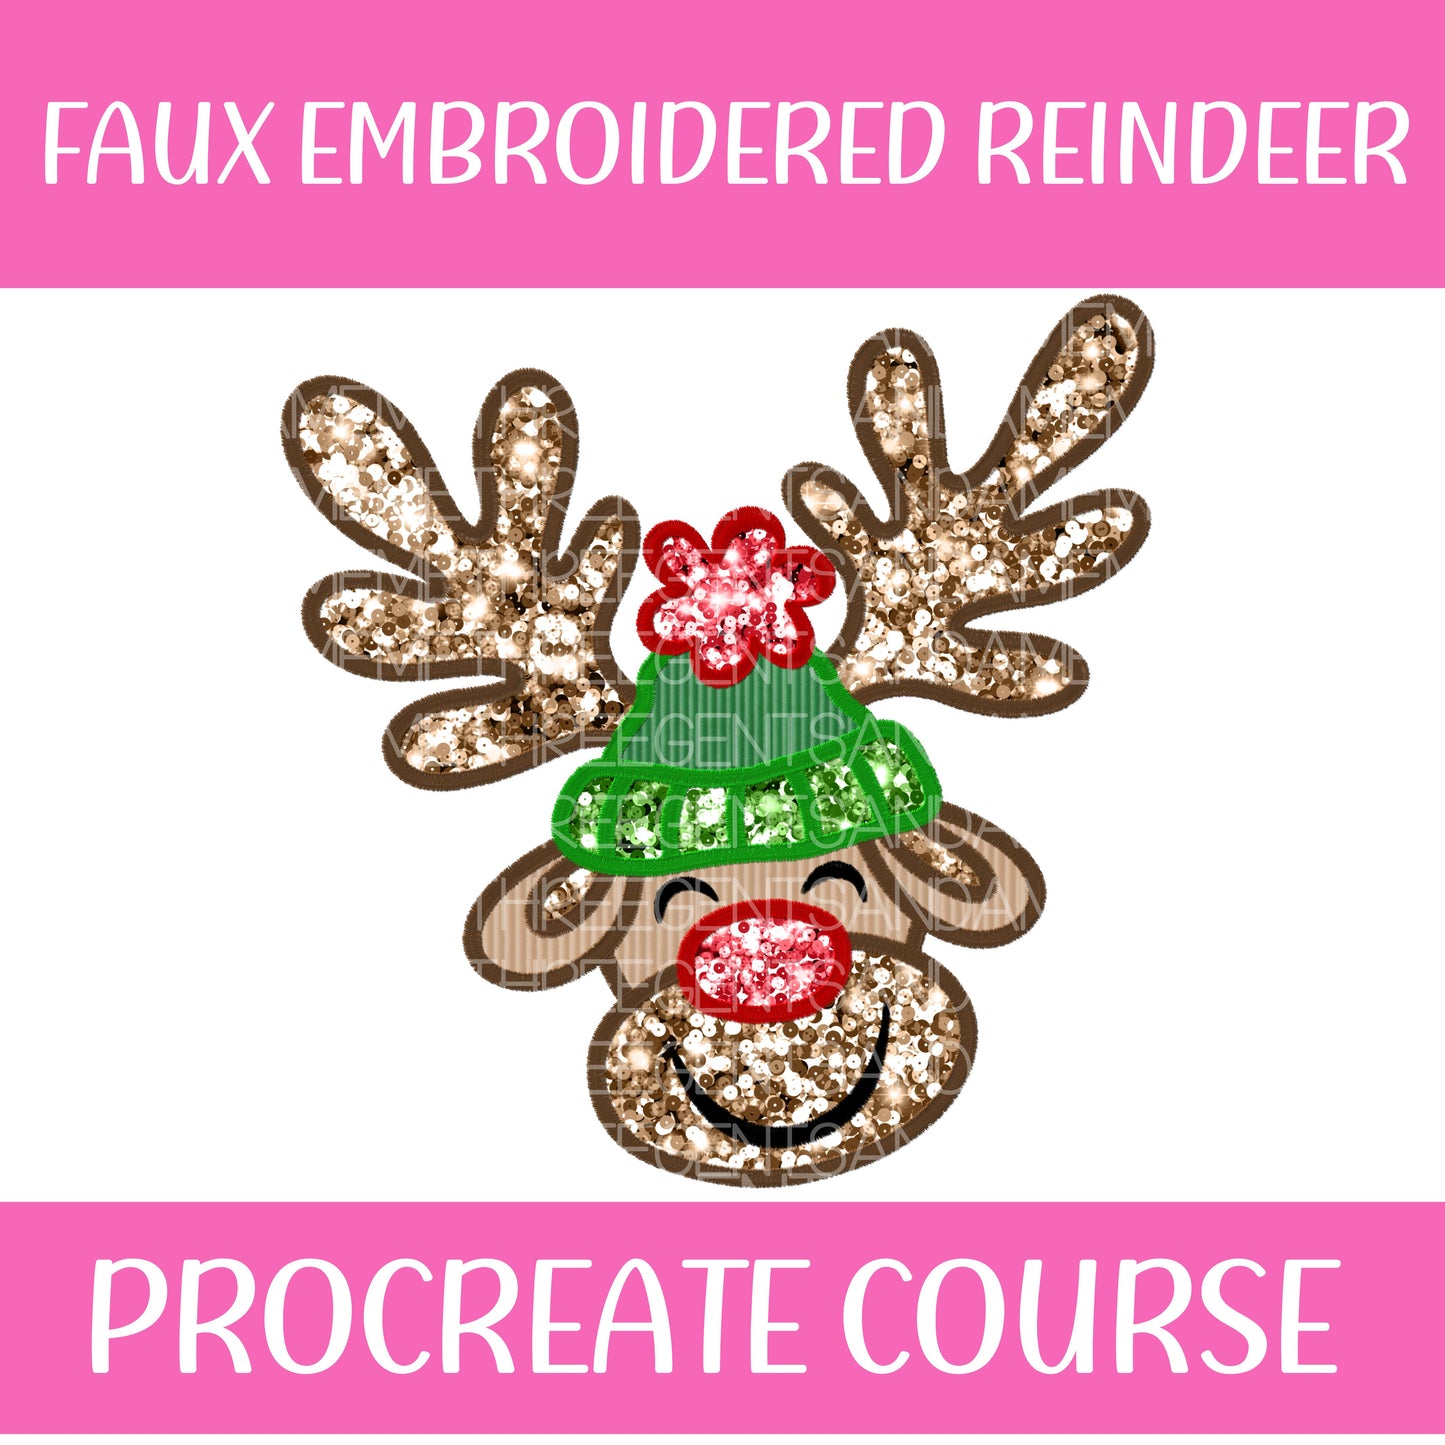 FAUX EMBROIDERED REINDEER PROCREATE COURSE